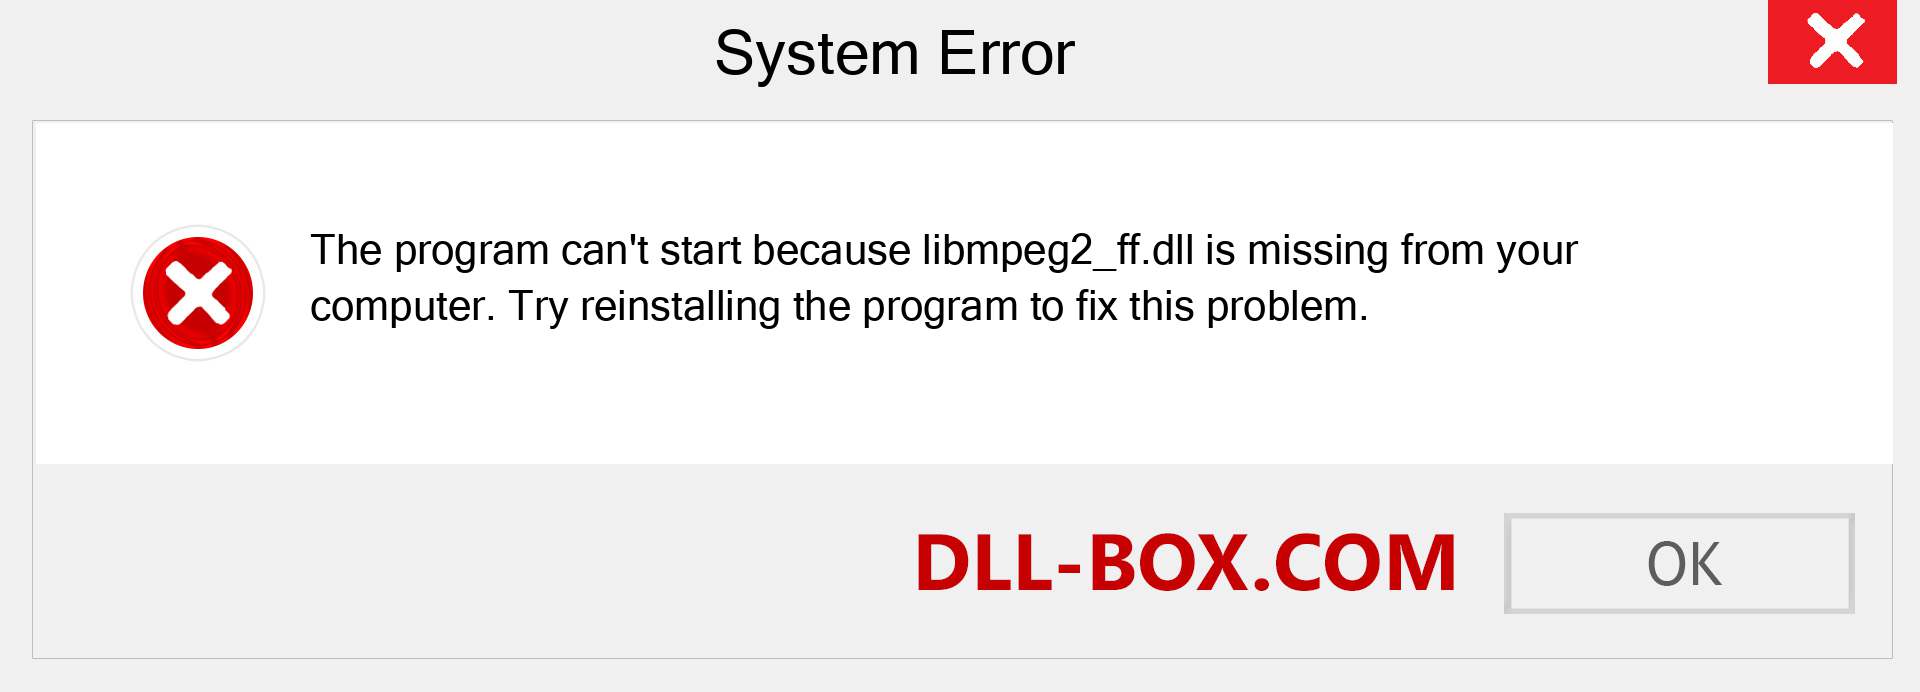  libmpeg2_ff.dll file is missing?. Download for Windows 7, 8, 10 - Fix  libmpeg2_ff dll Missing Error on Windows, photos, images